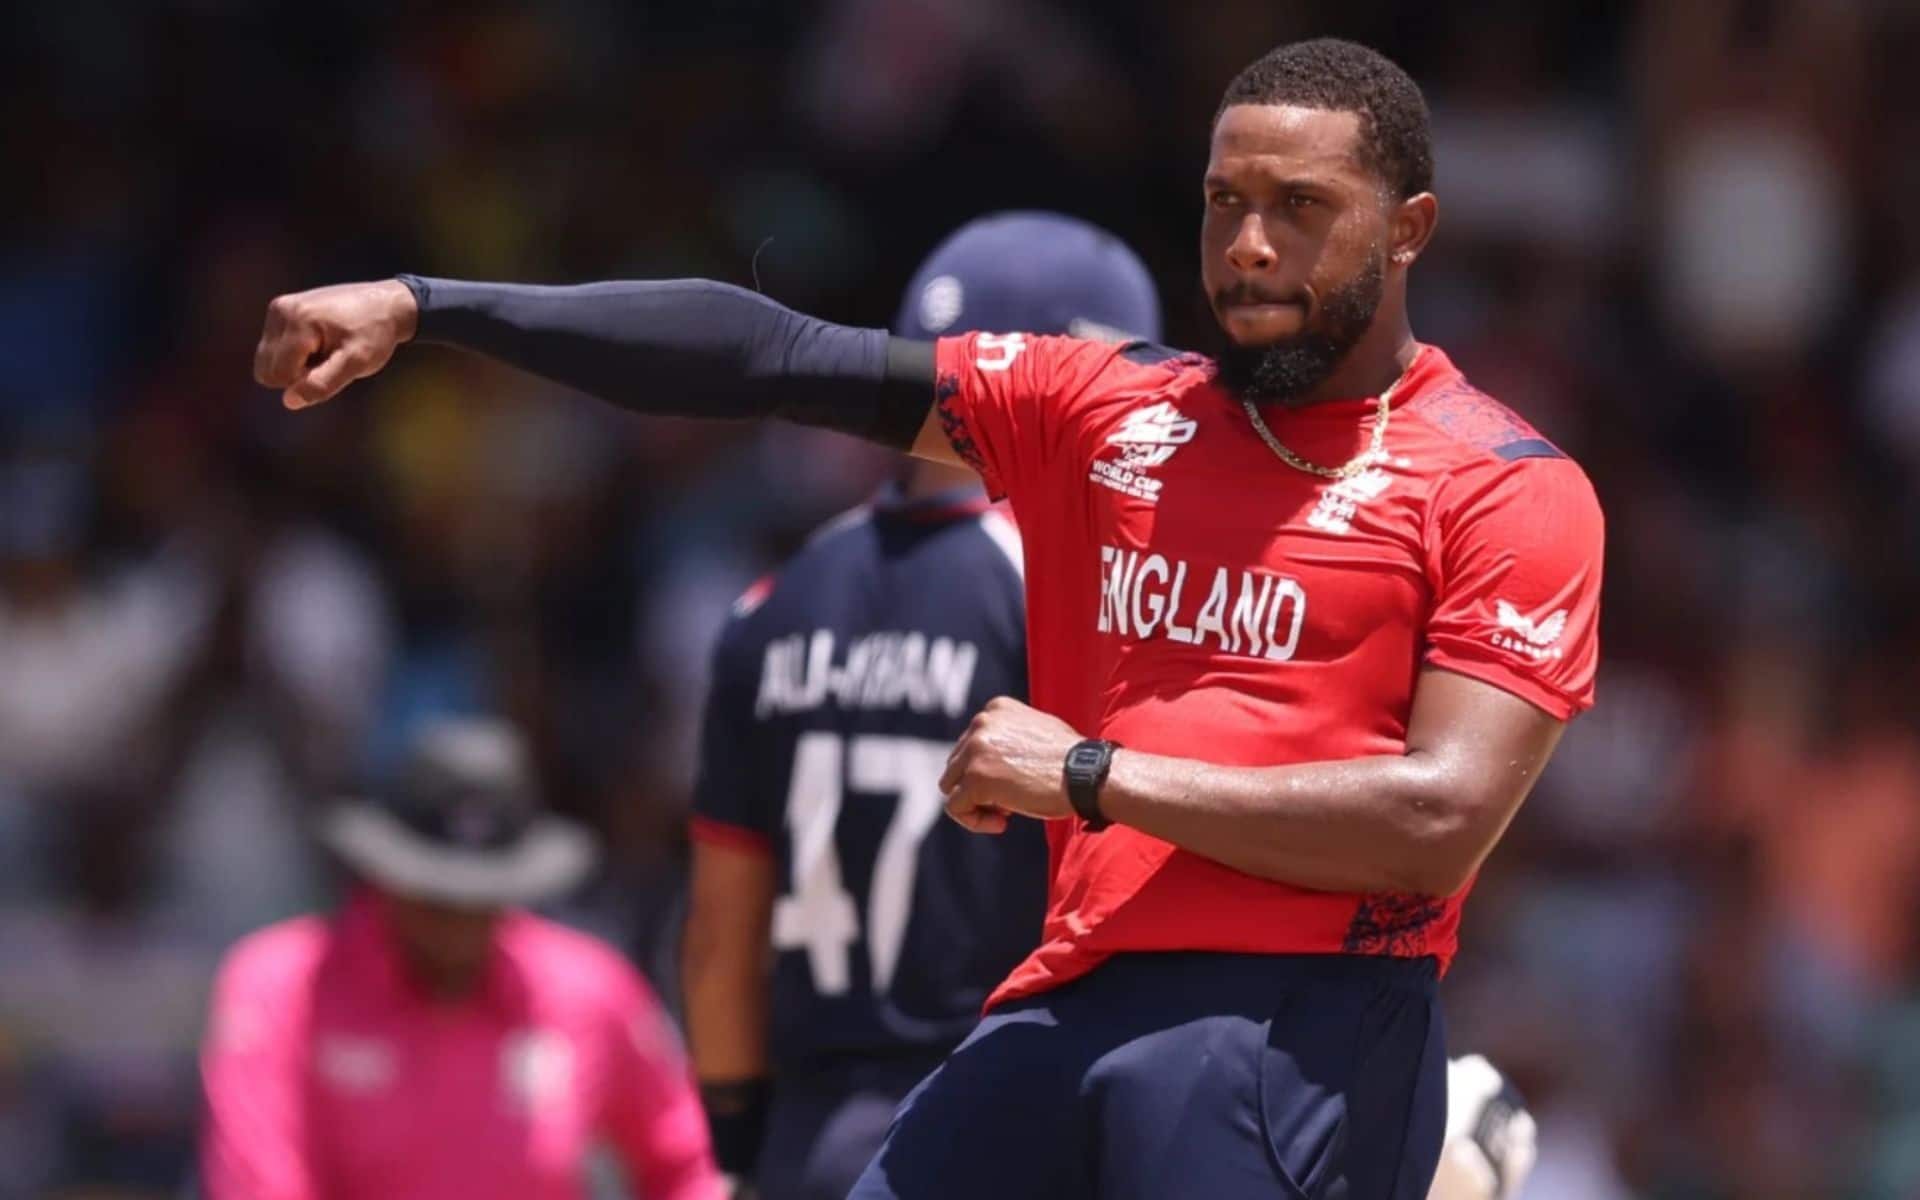 Chris Jordan celebrating one of his hat-trick wickets against USA (x.com)